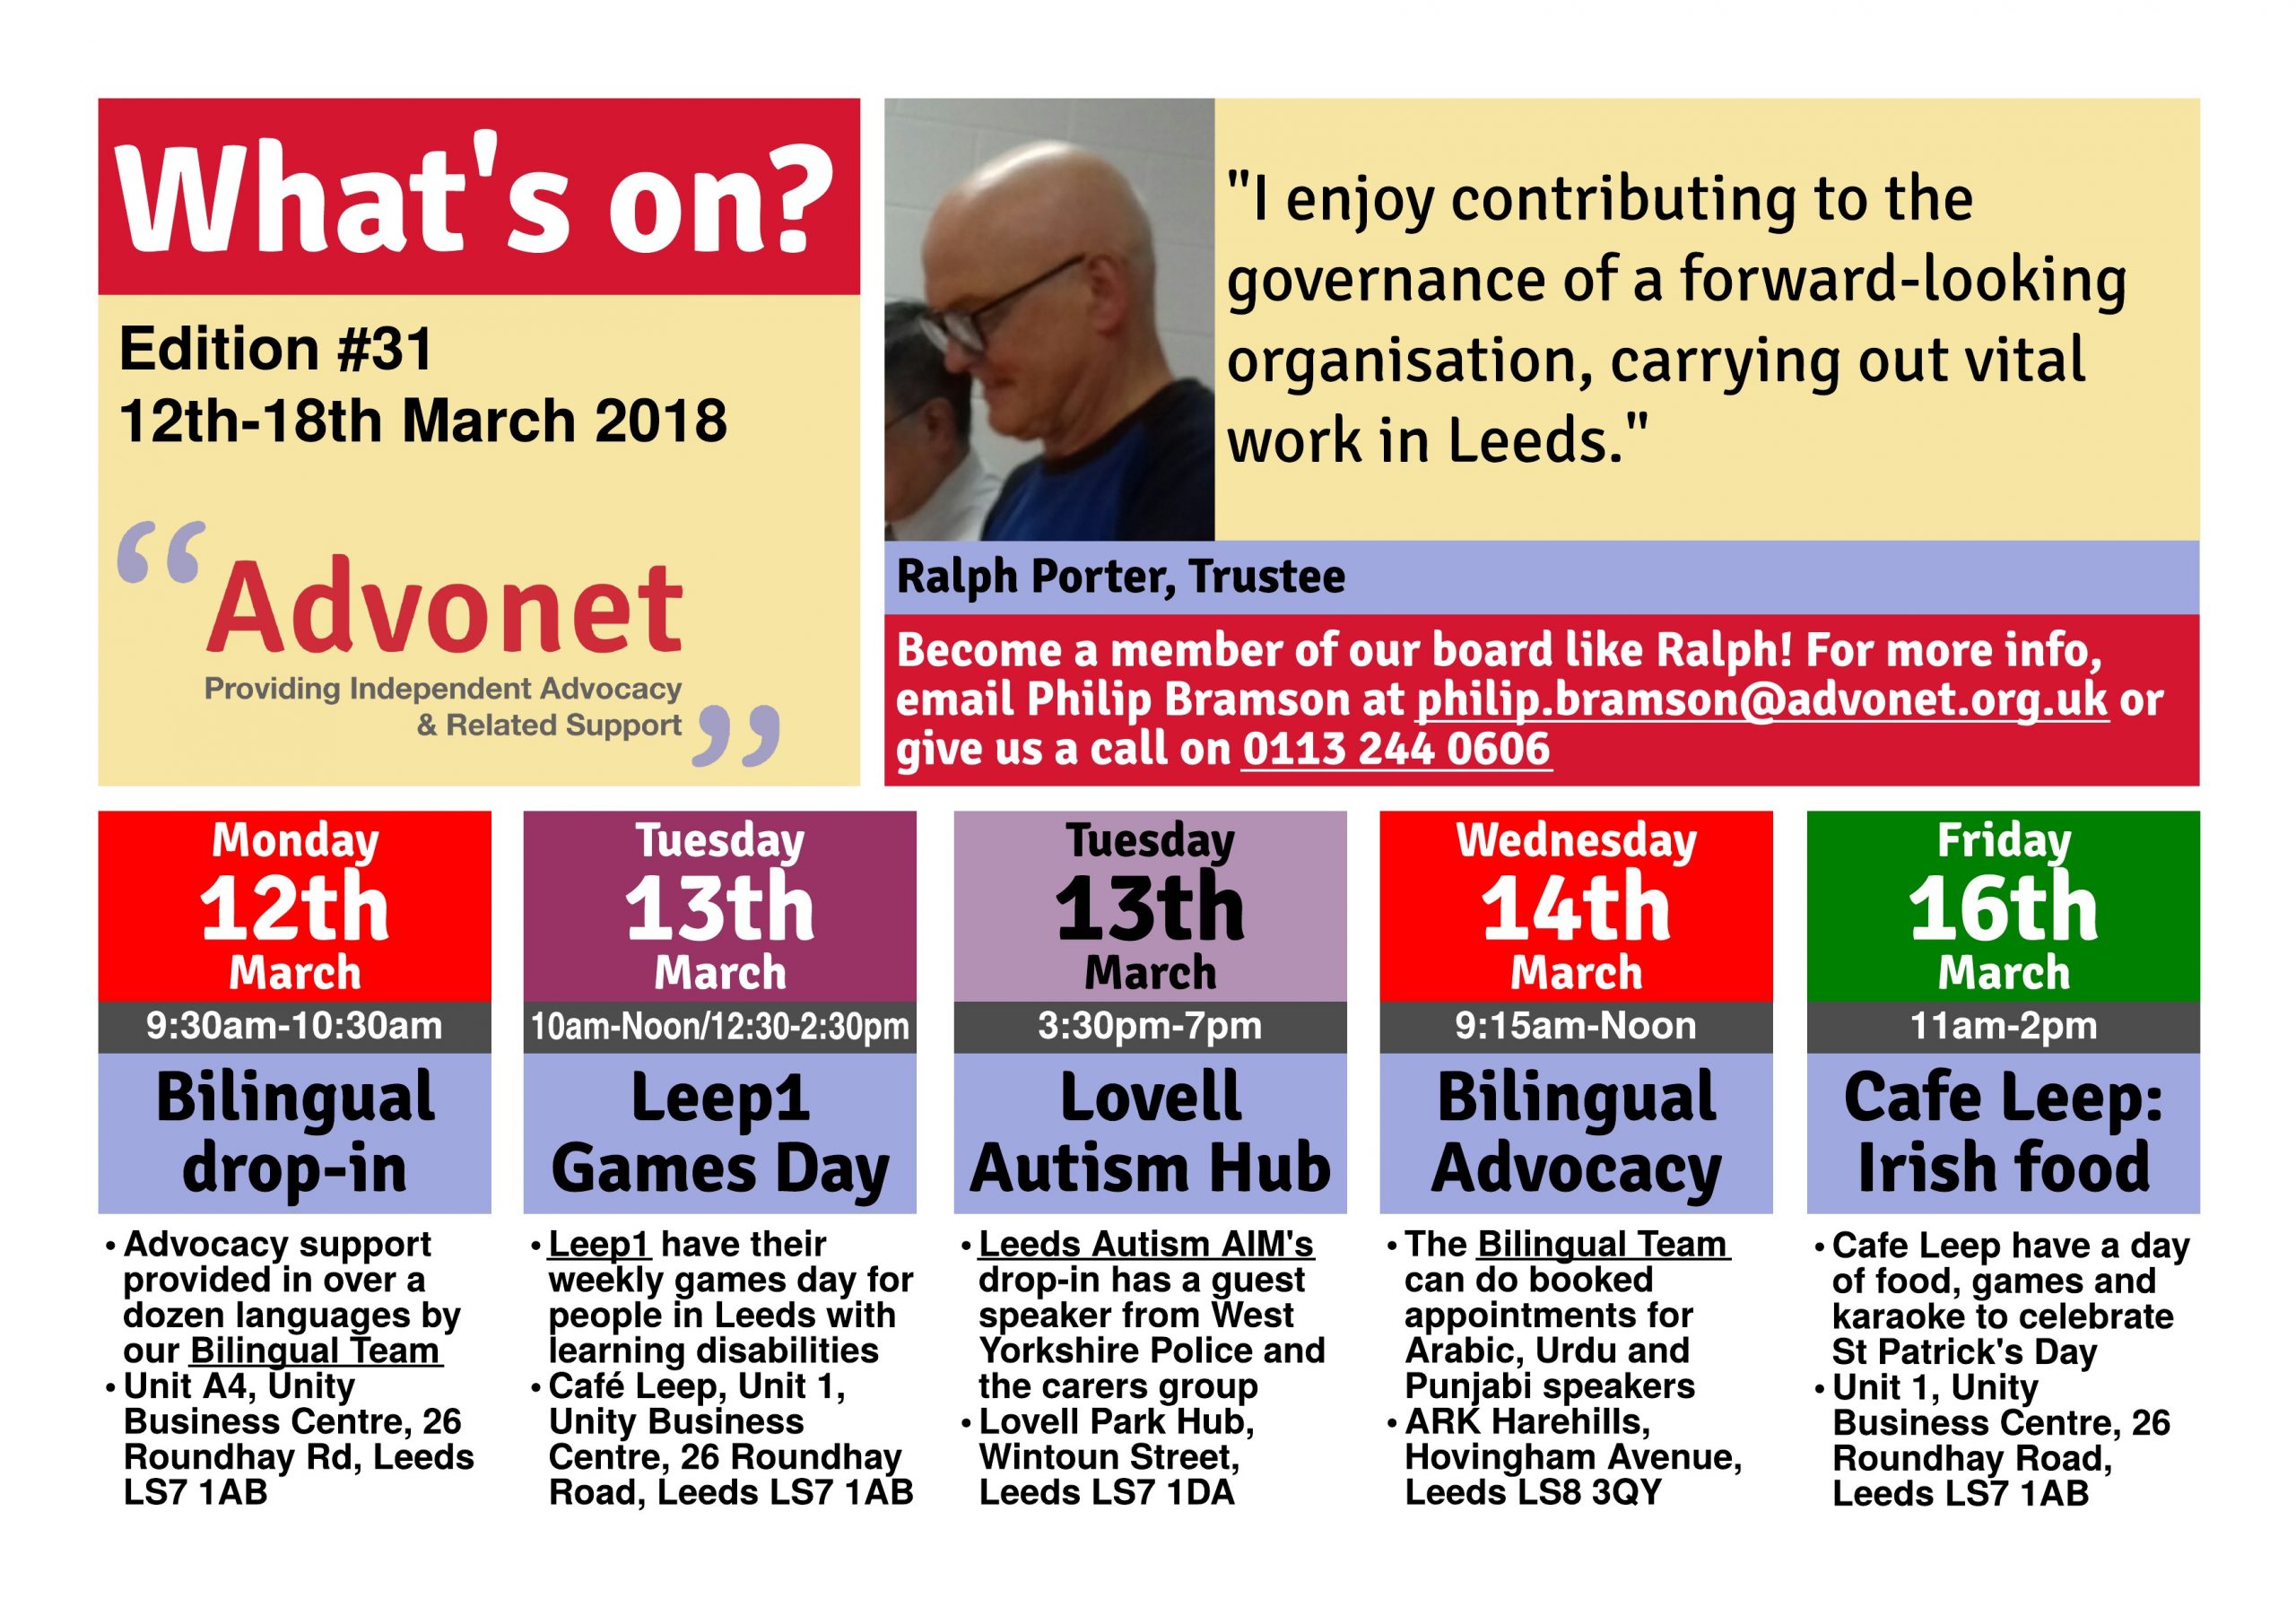 What's on 12th-18th March